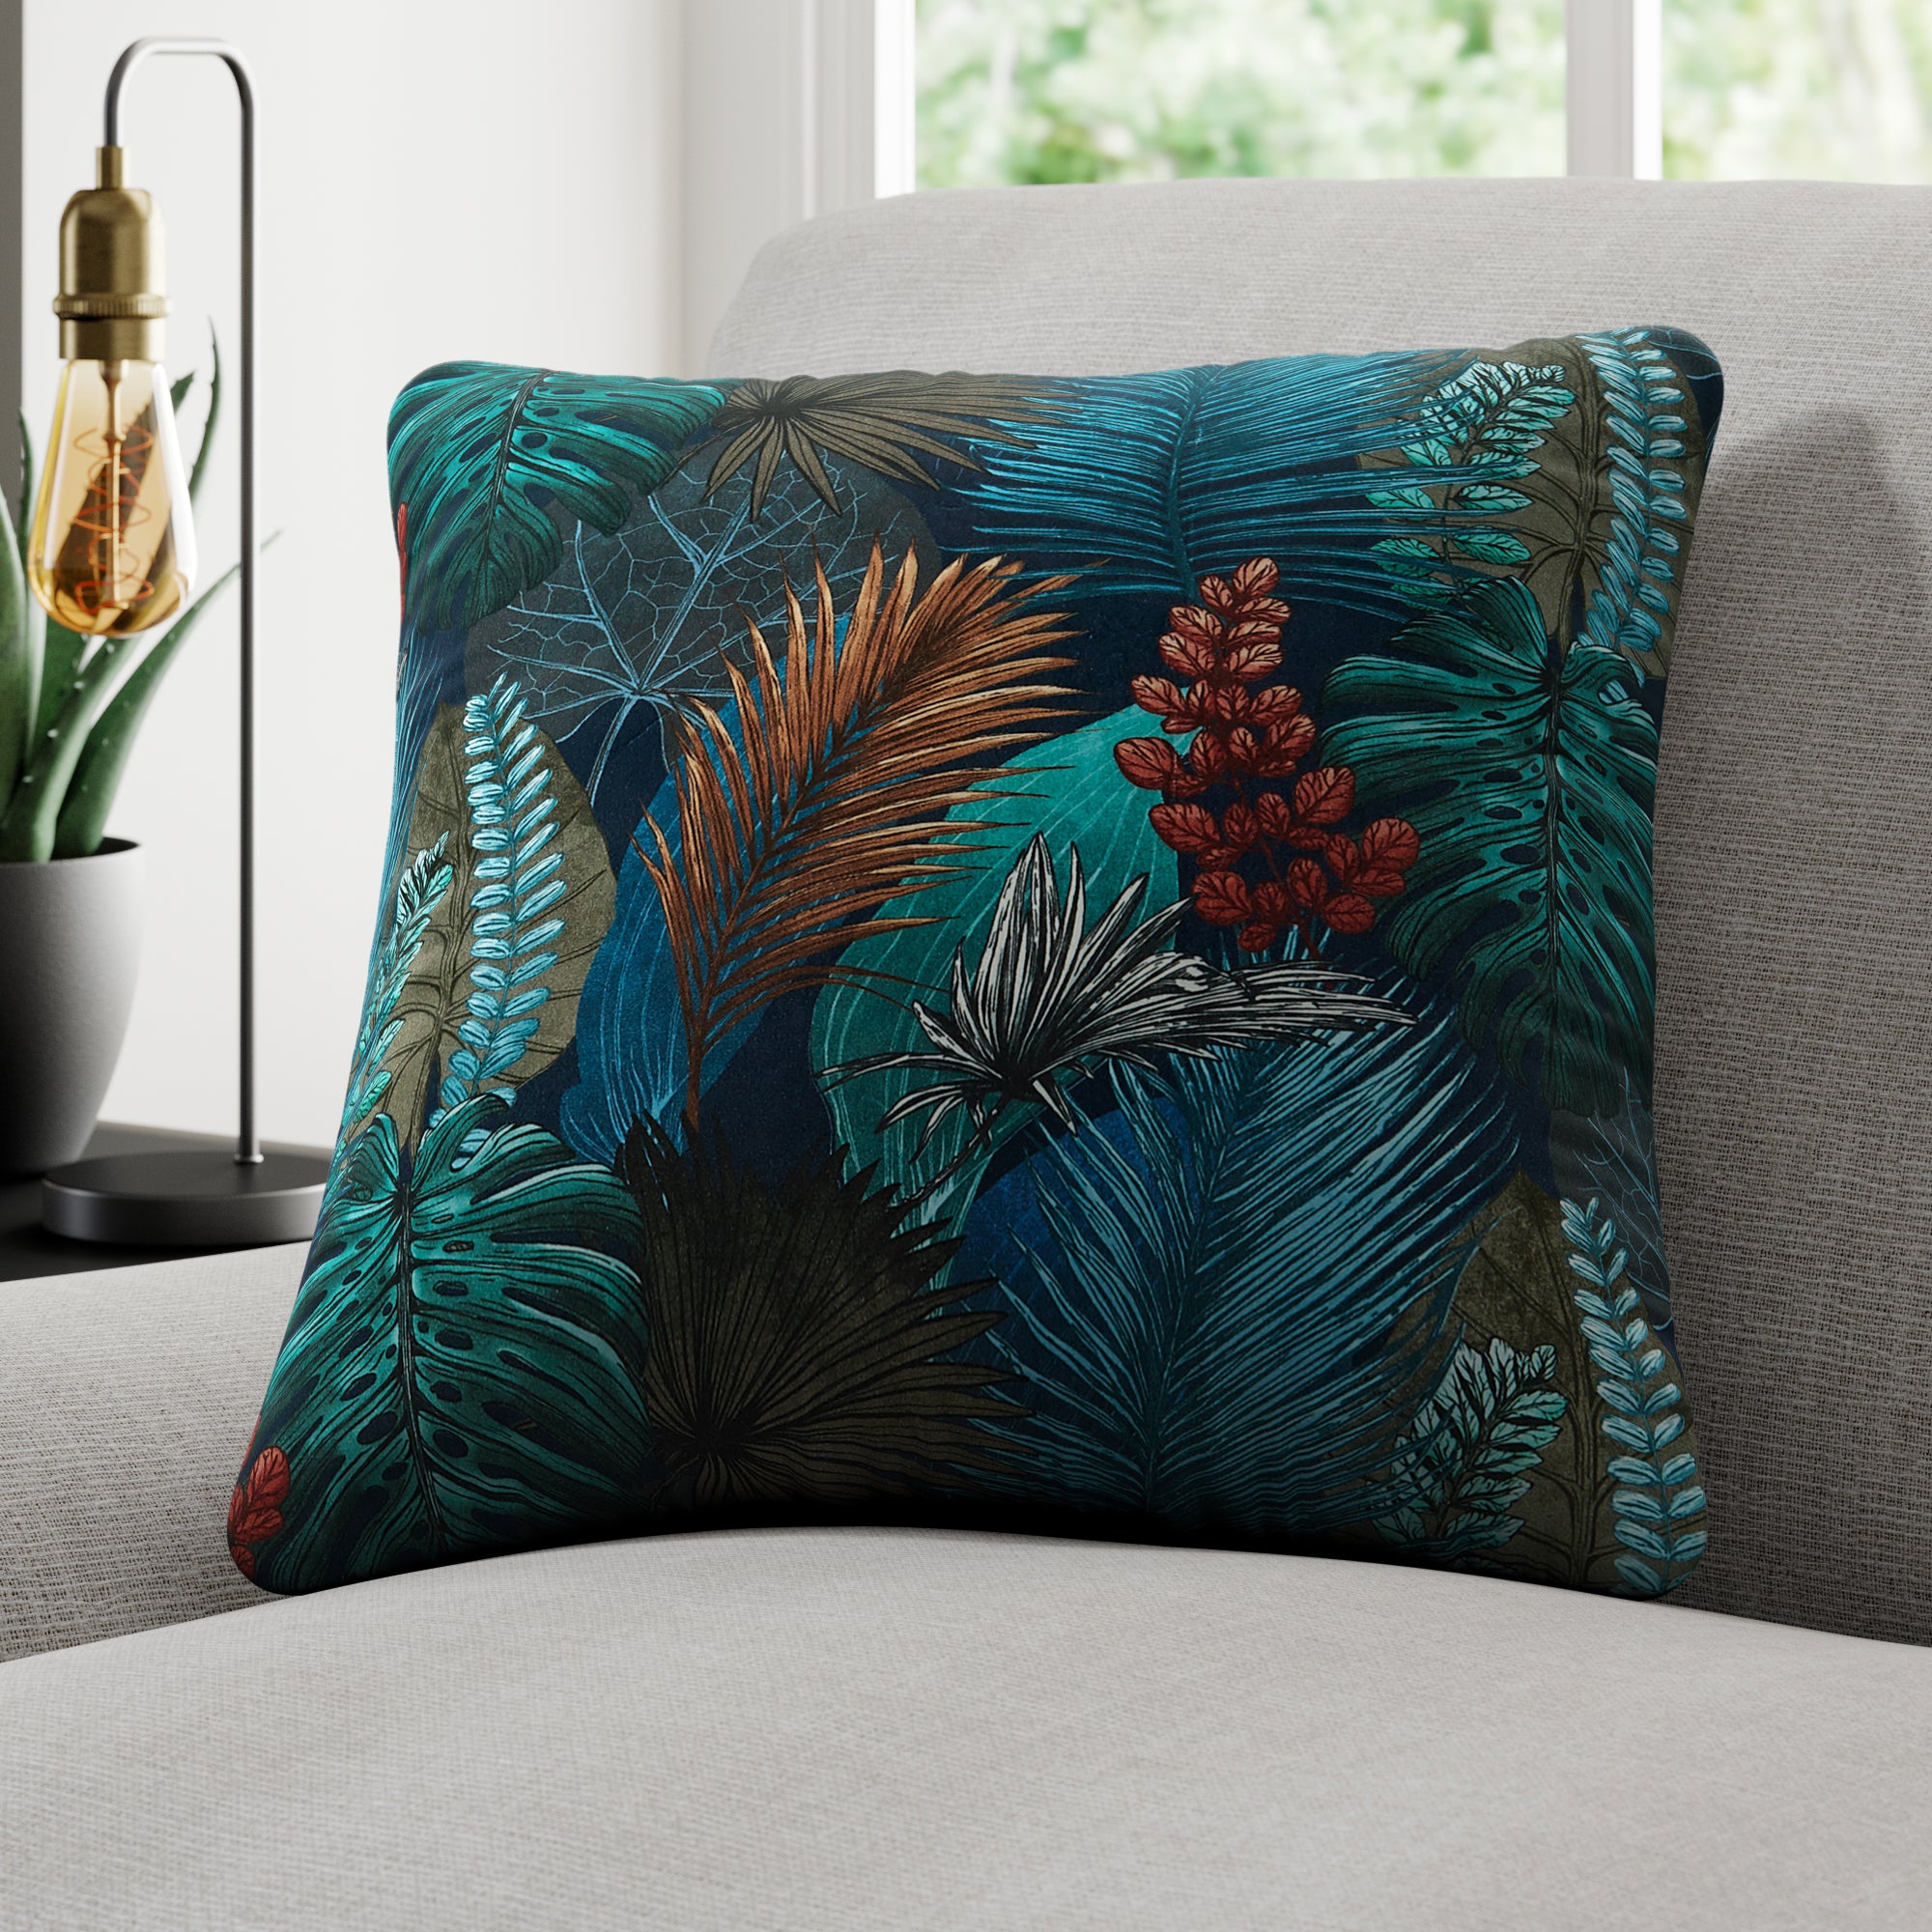 Rainforest Made to Order Cushion Cover